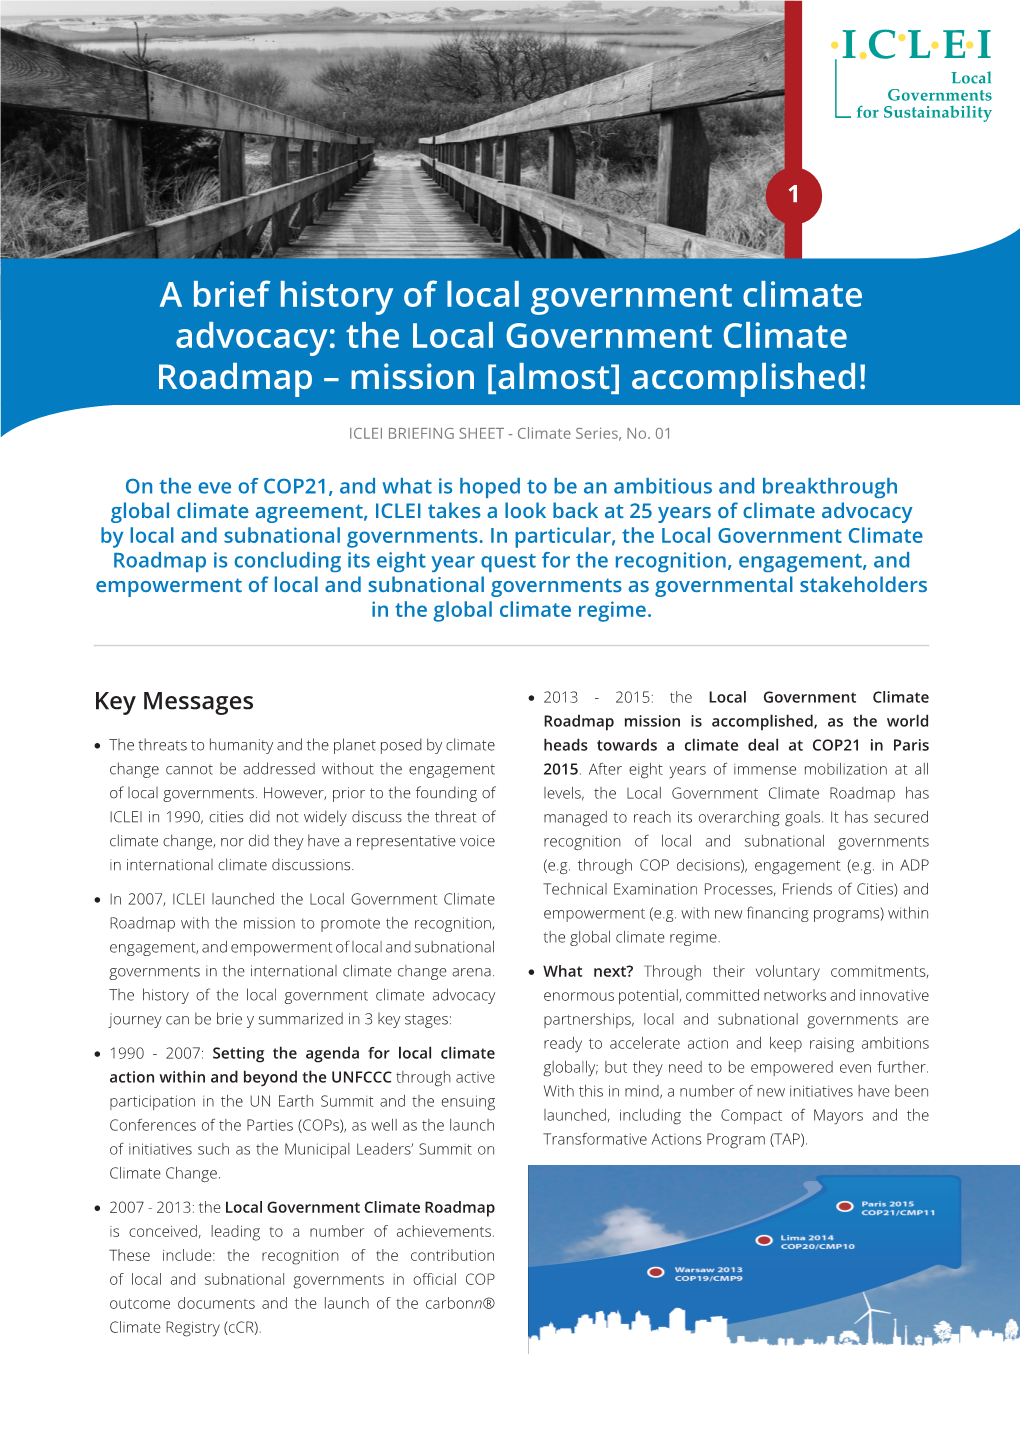 The Local Government Climate Roadmap – Mission [Almost] Accomplished!